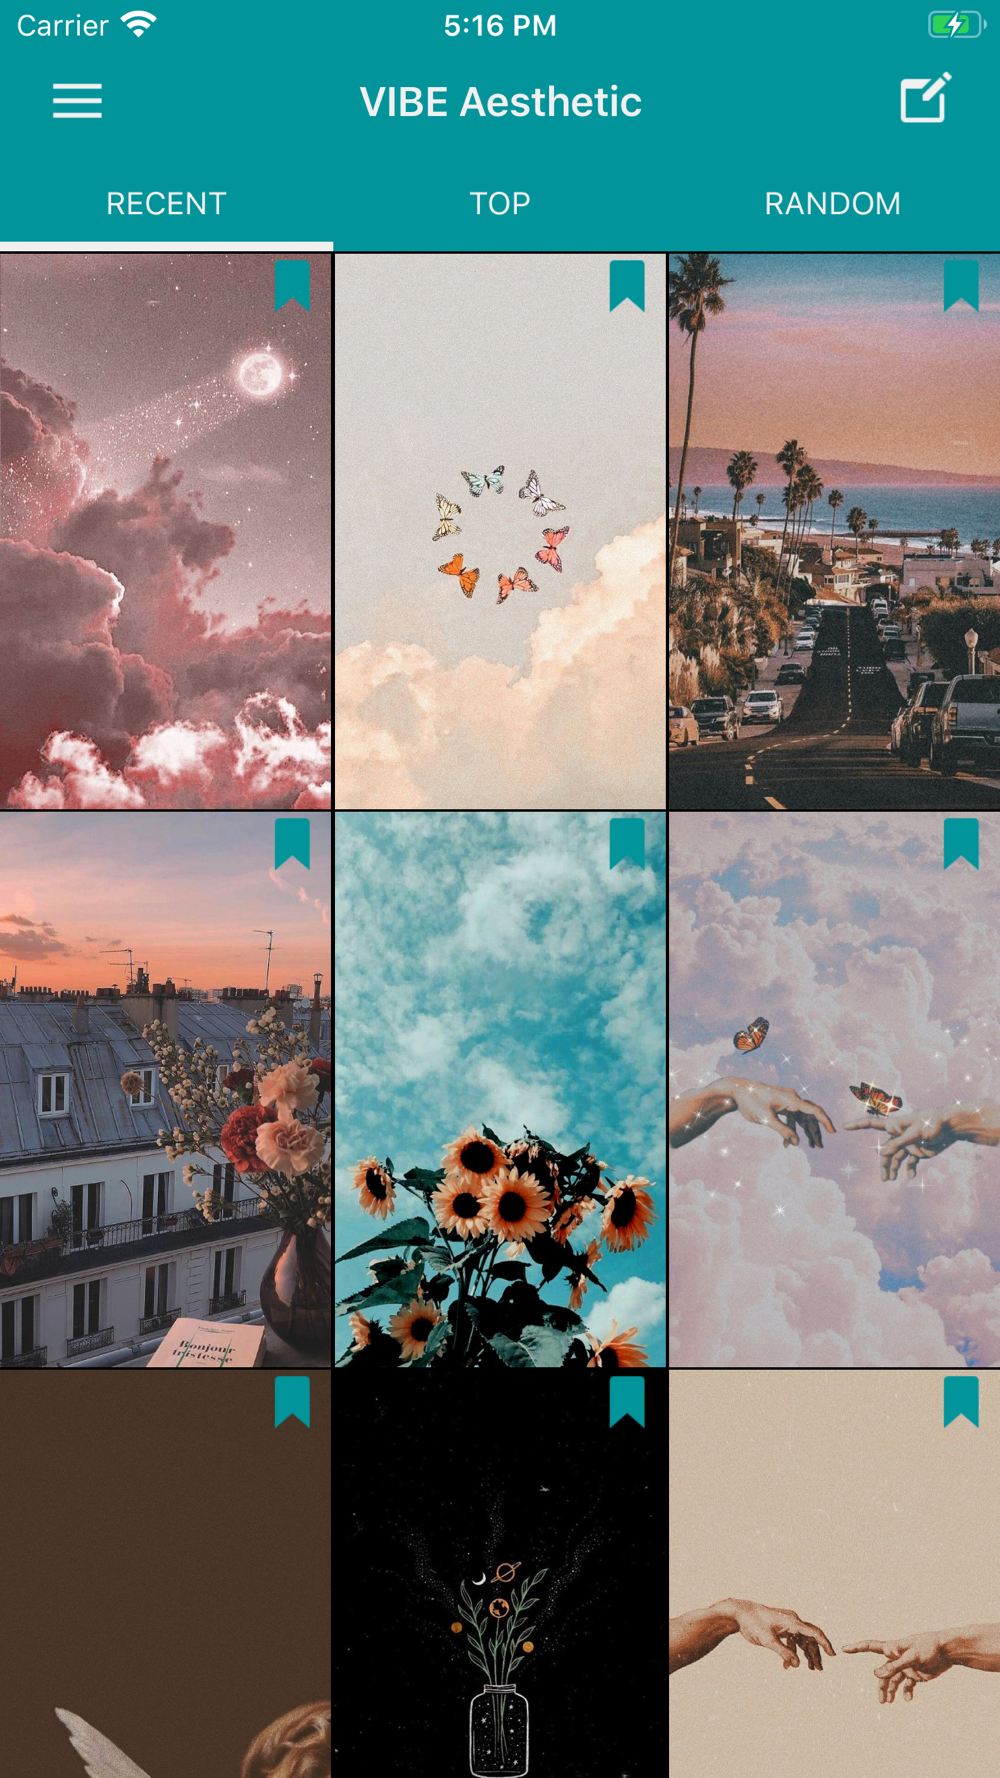 Vibe Aesthetic Wallpapers Hd Free Download App For Iphone Steprimo Com